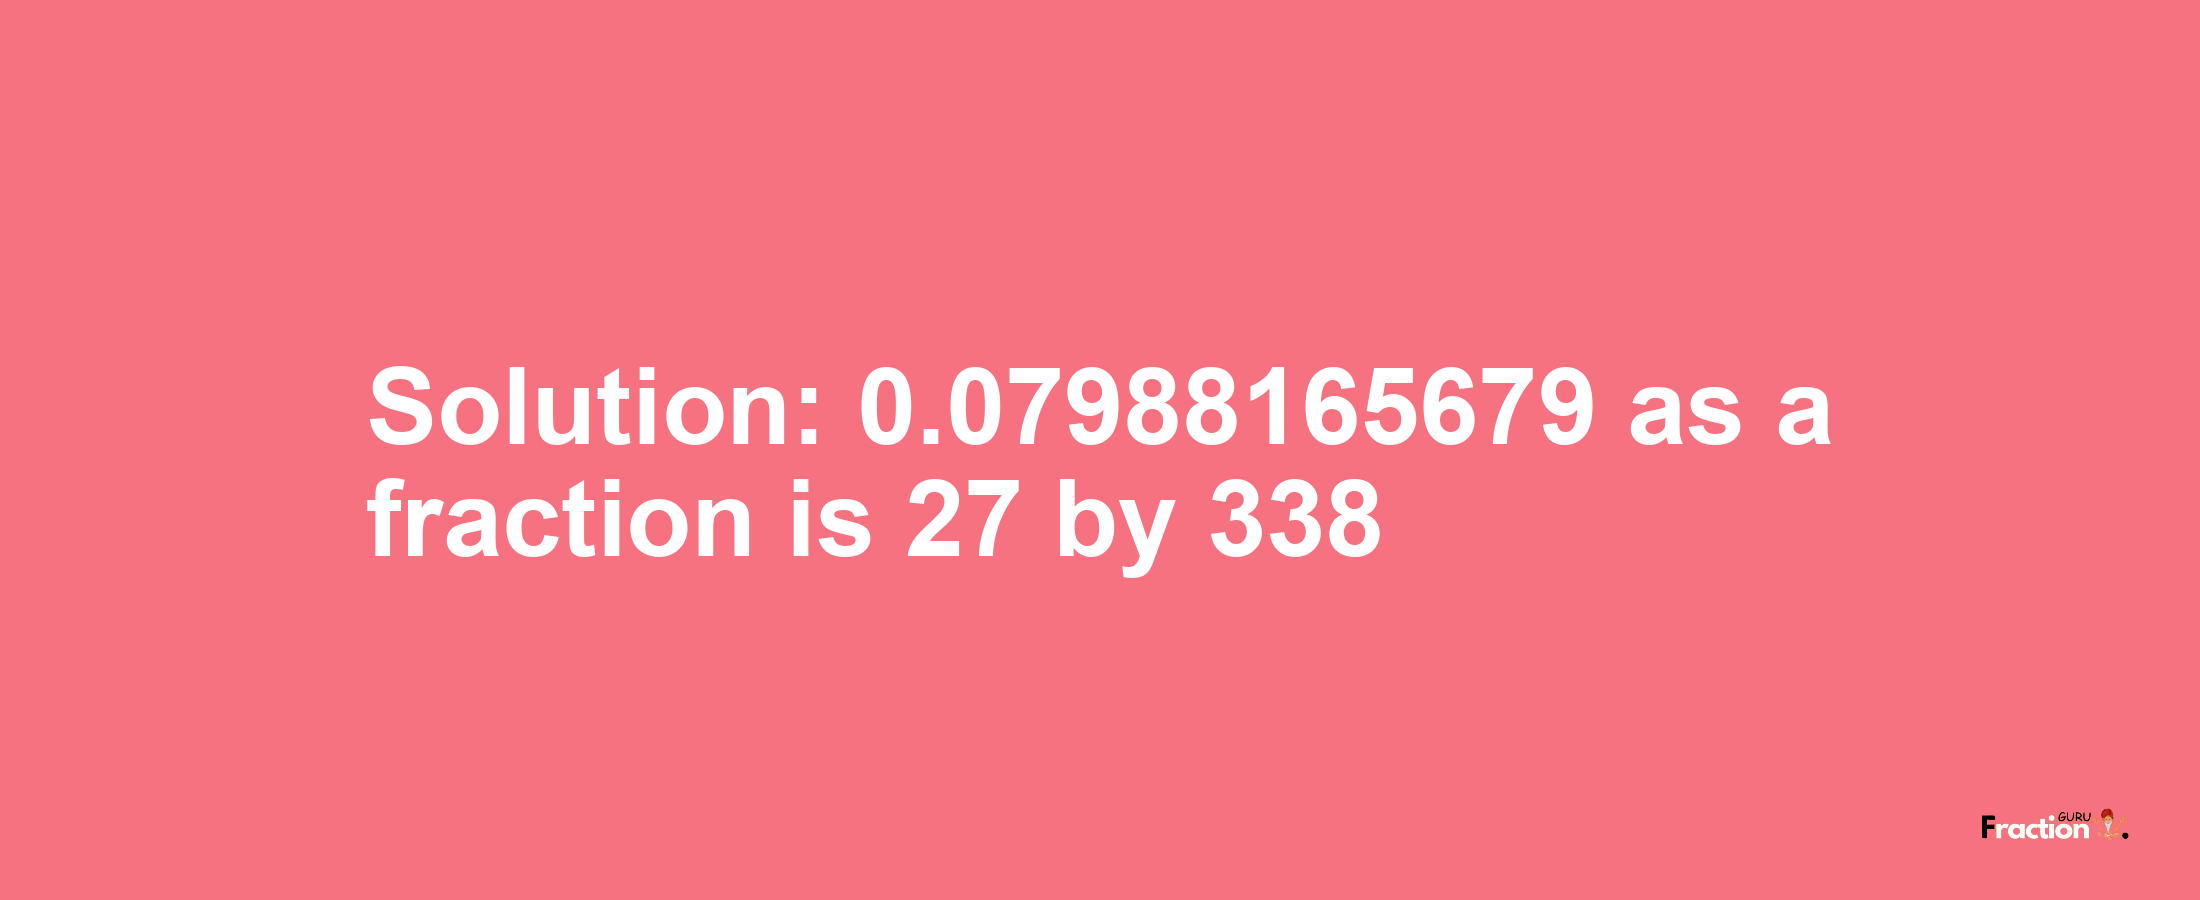 Solution:0.07988165679 as a fraction is 27/338